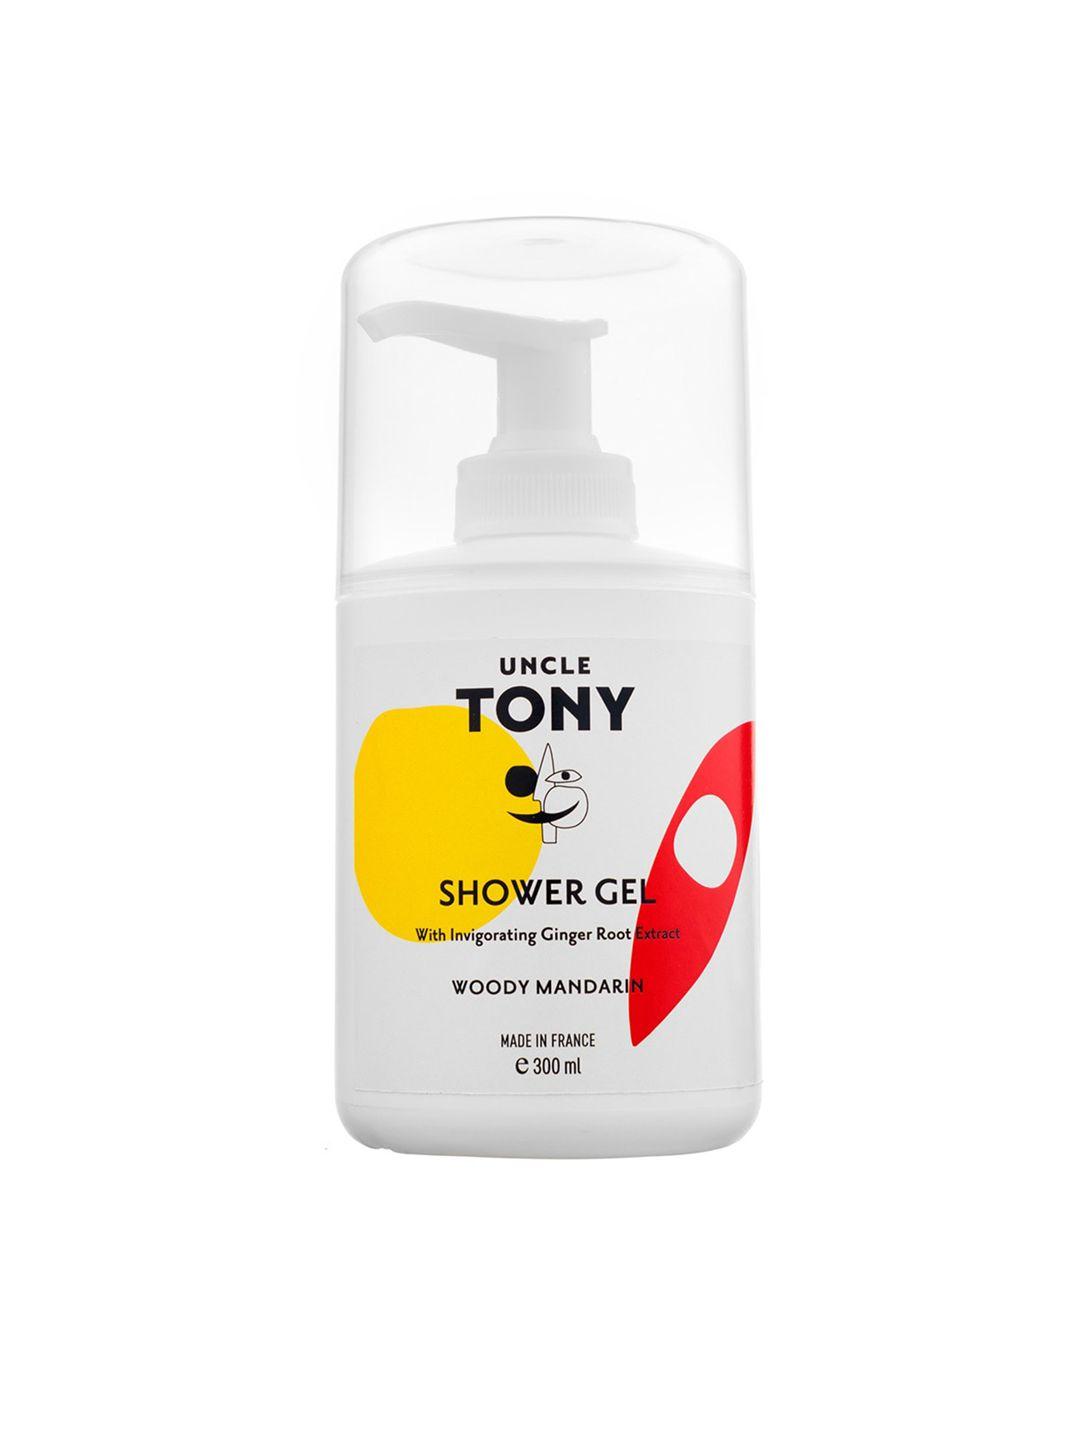 uncle tony woody mandarin shower gel with ginger root extract 300 ml